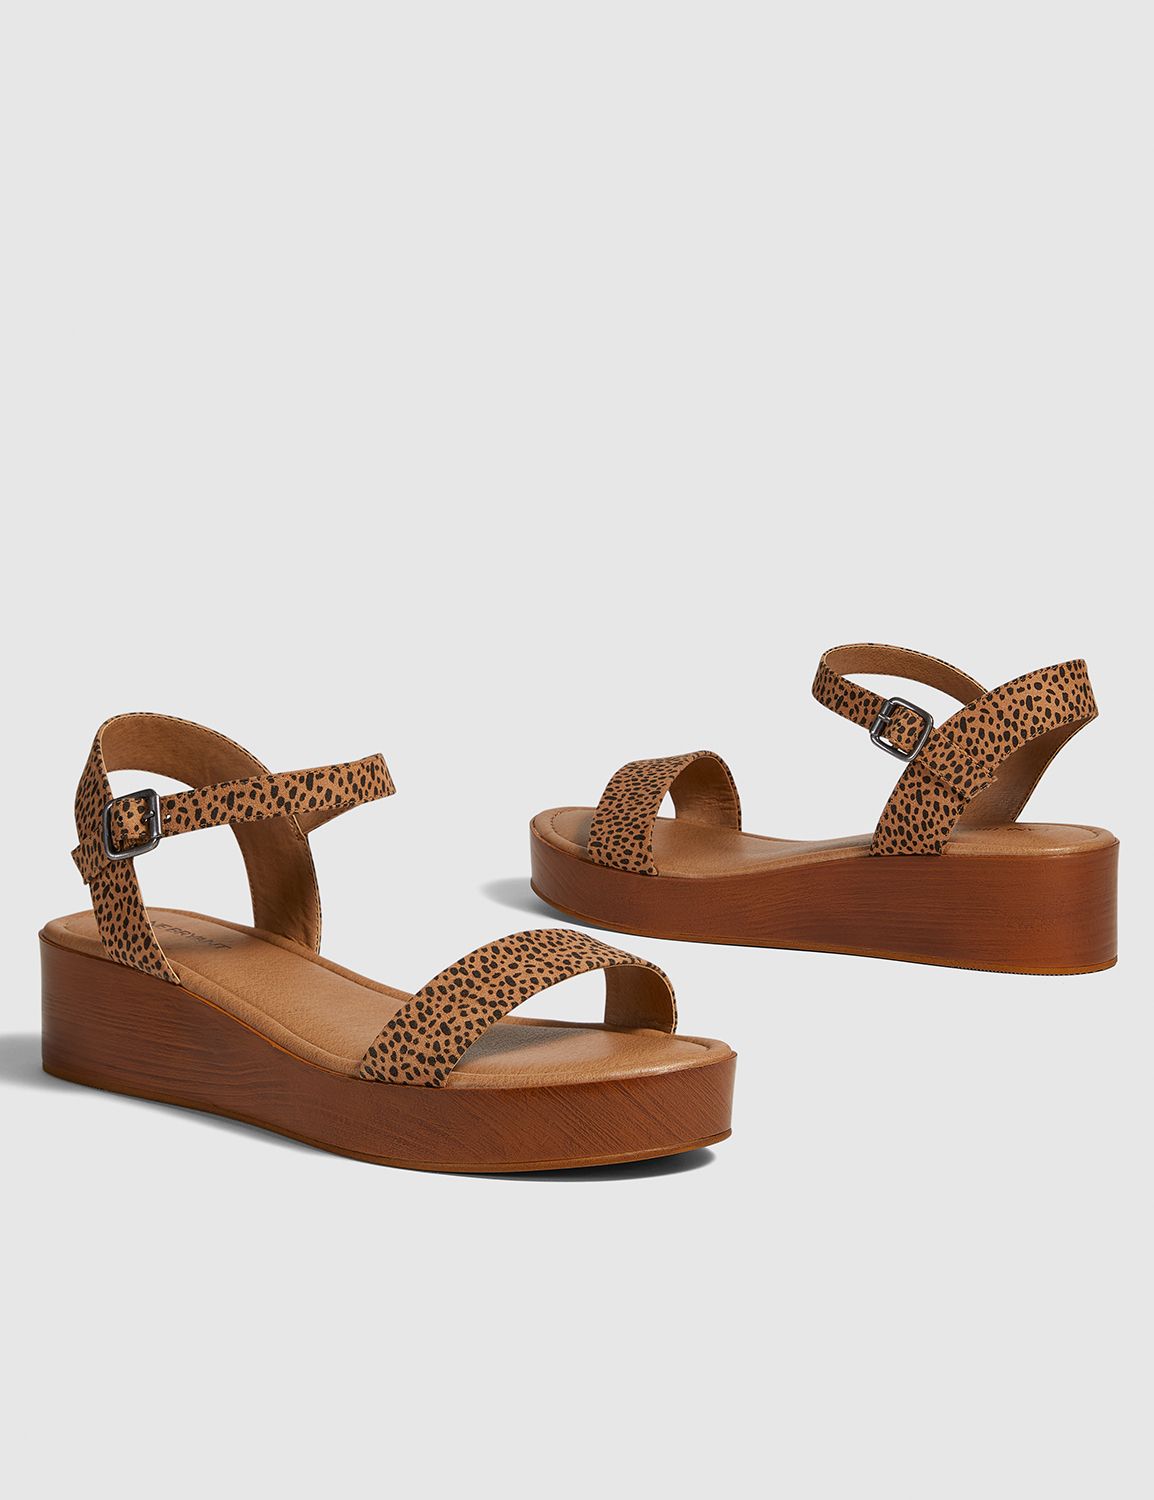 size 10 wide sandals